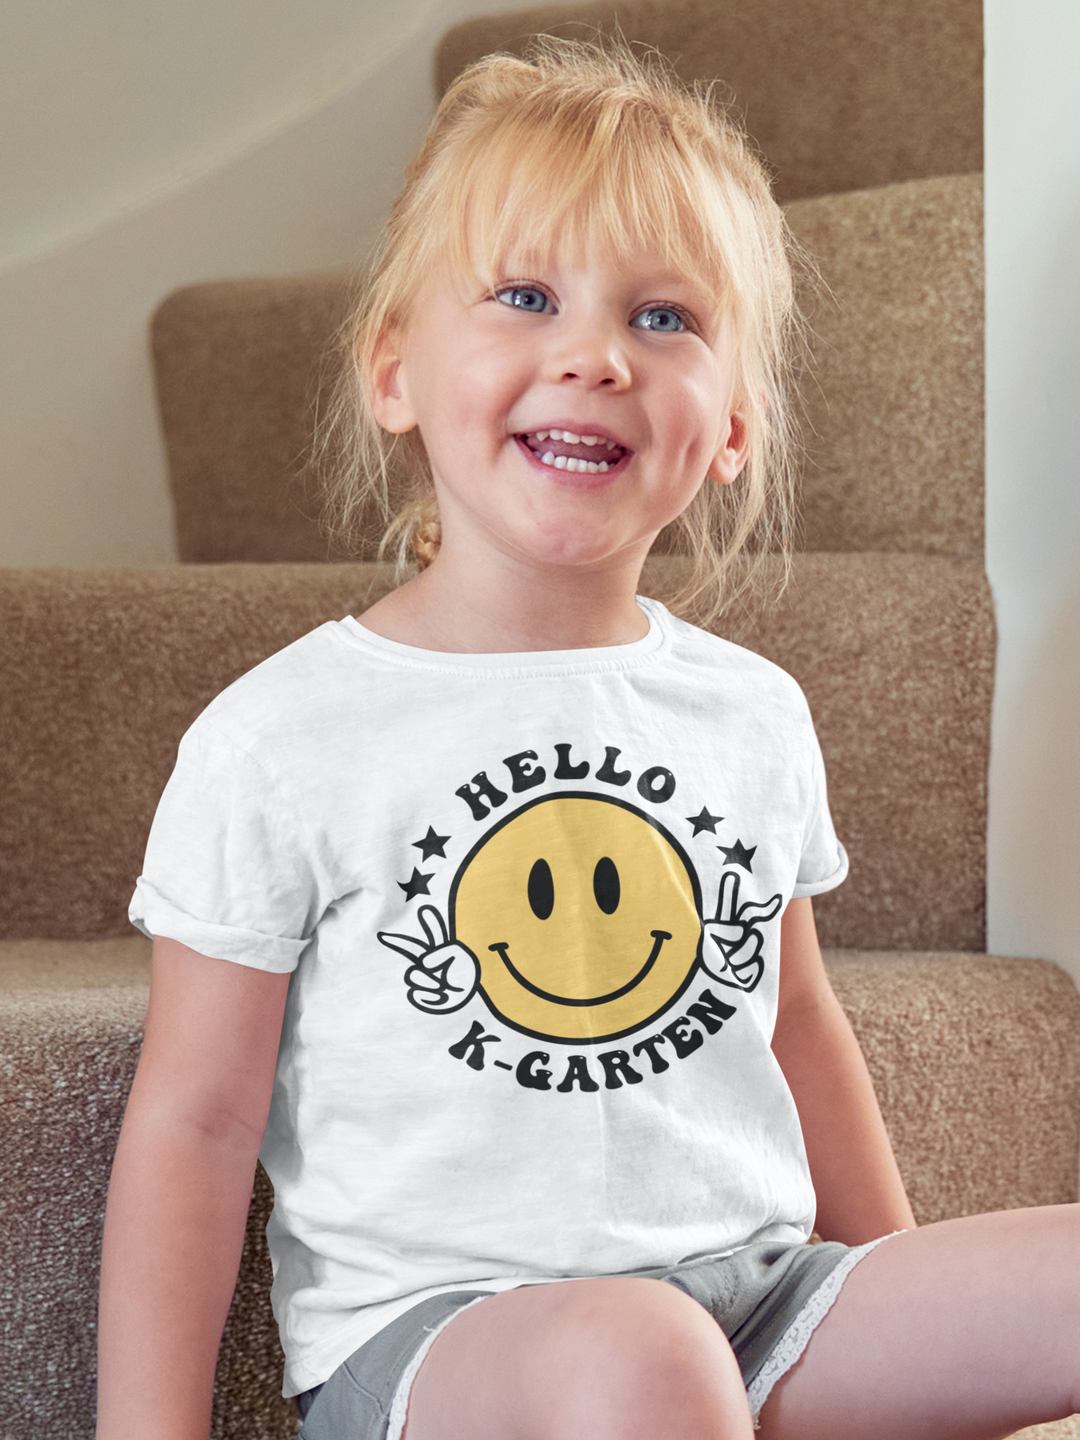 A Hello Kindergarten Toddler Tee featuring a smiling child on stairs, close-ups of eyes, mouth, and nose. Soft 100% cotton, light fabric, tear-away label, perfect for sensitive skin. Ideal for first adventures.